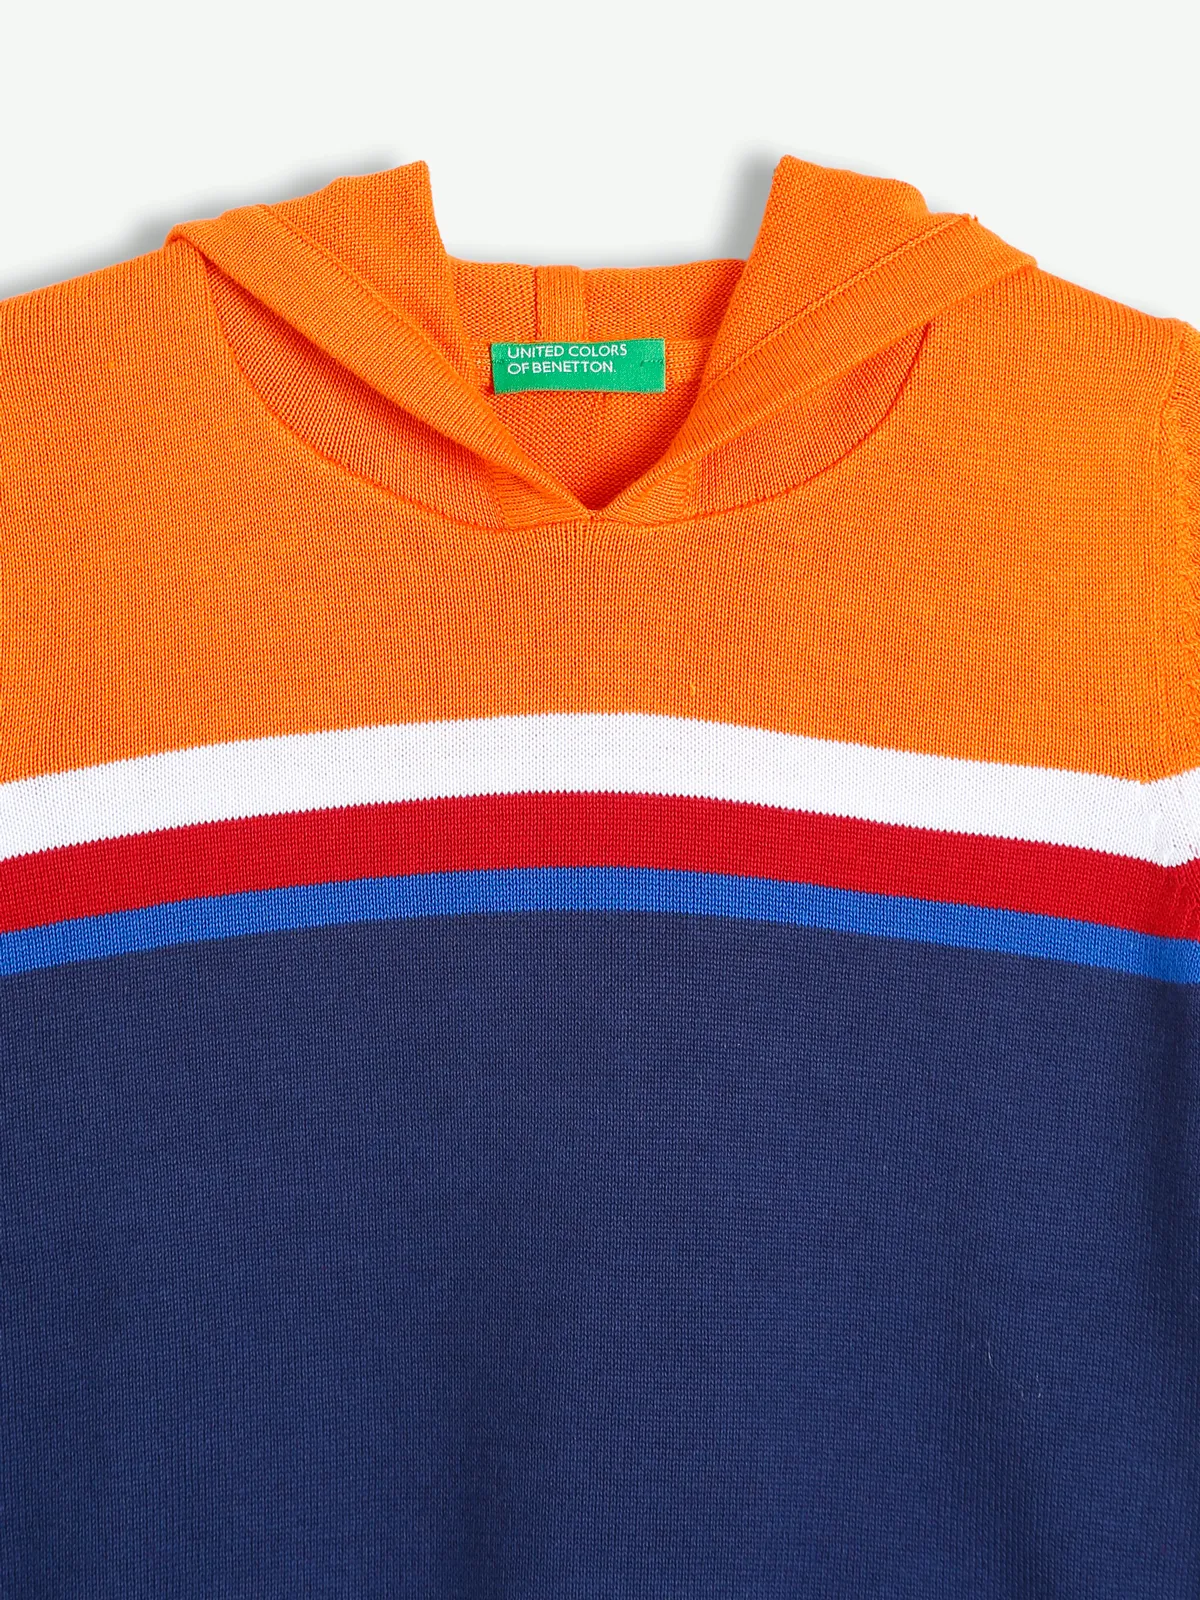 UCB knitted navy t shirt in color block